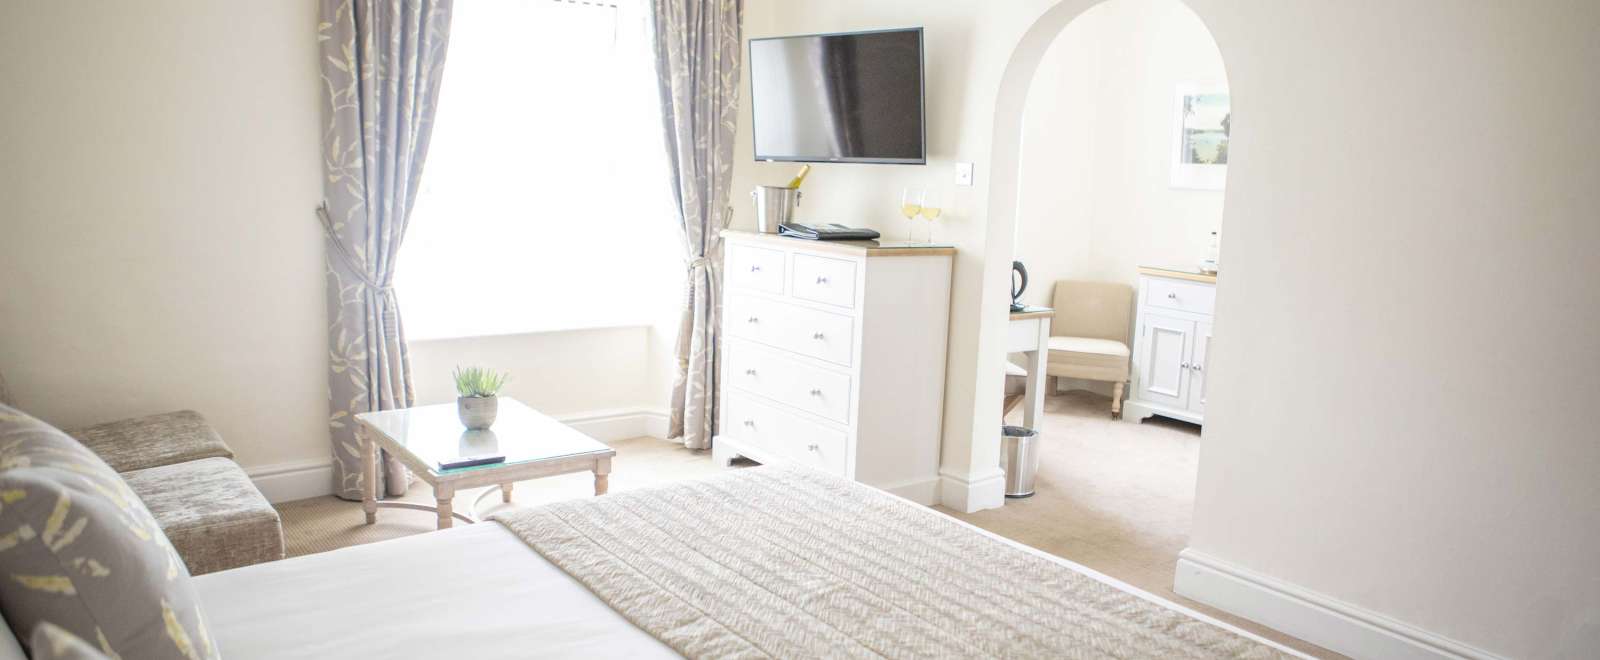 Royal Duchy Hotel Accommodation with Bed and Seating Area